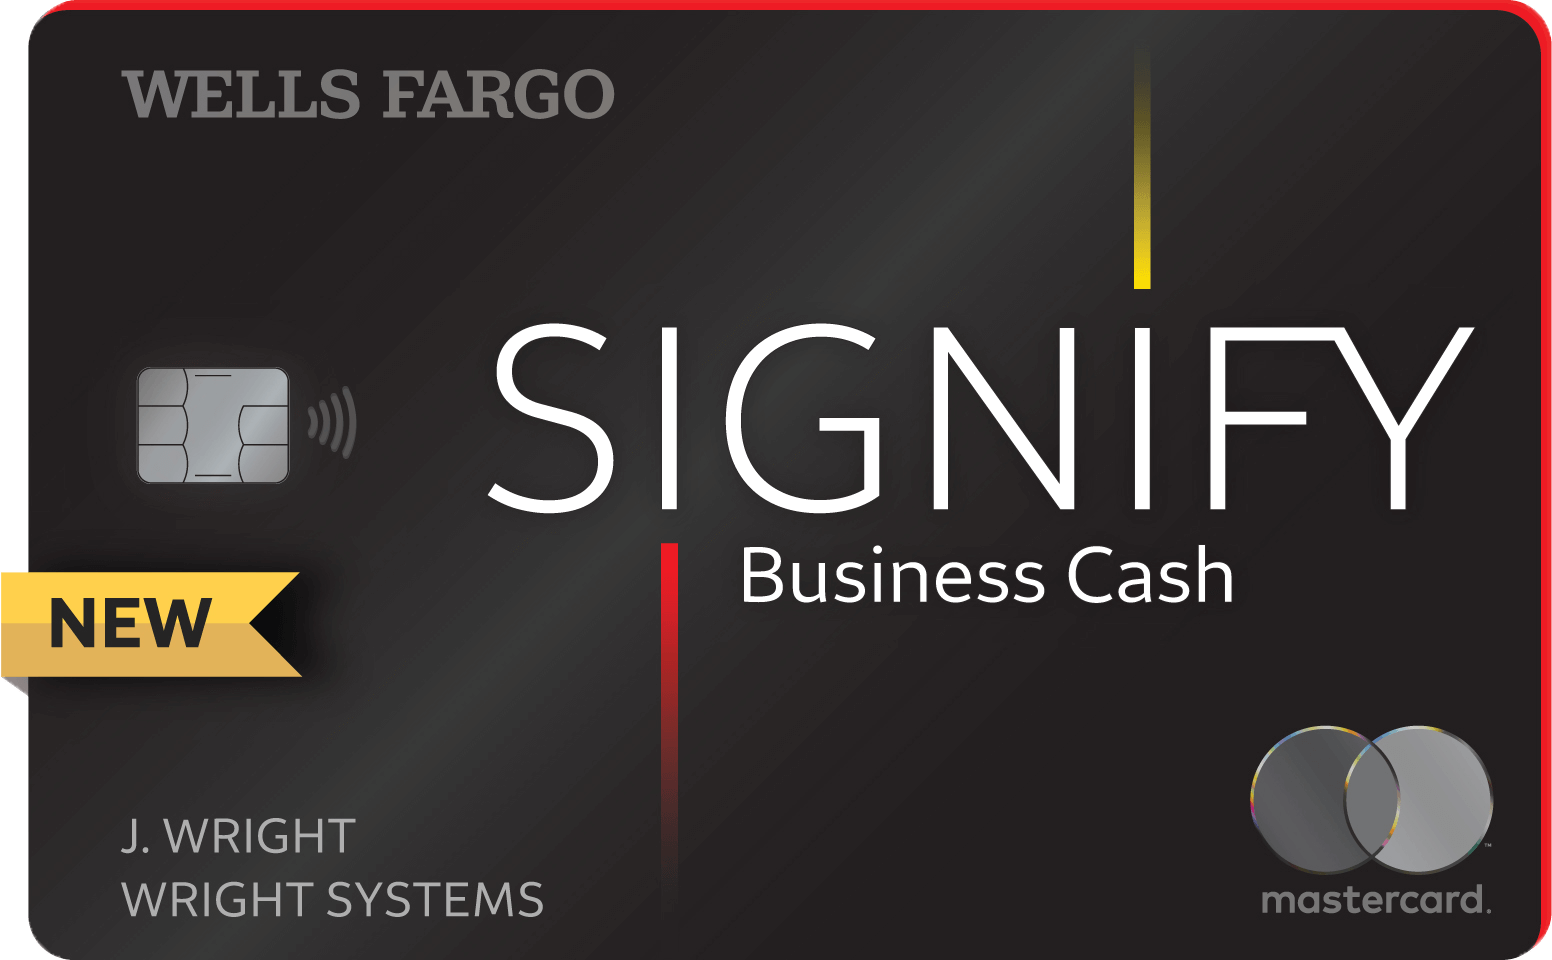 Wells Fargo Signify Business Cash(Service Mark) Card with chip and contactless tap to pay technology.